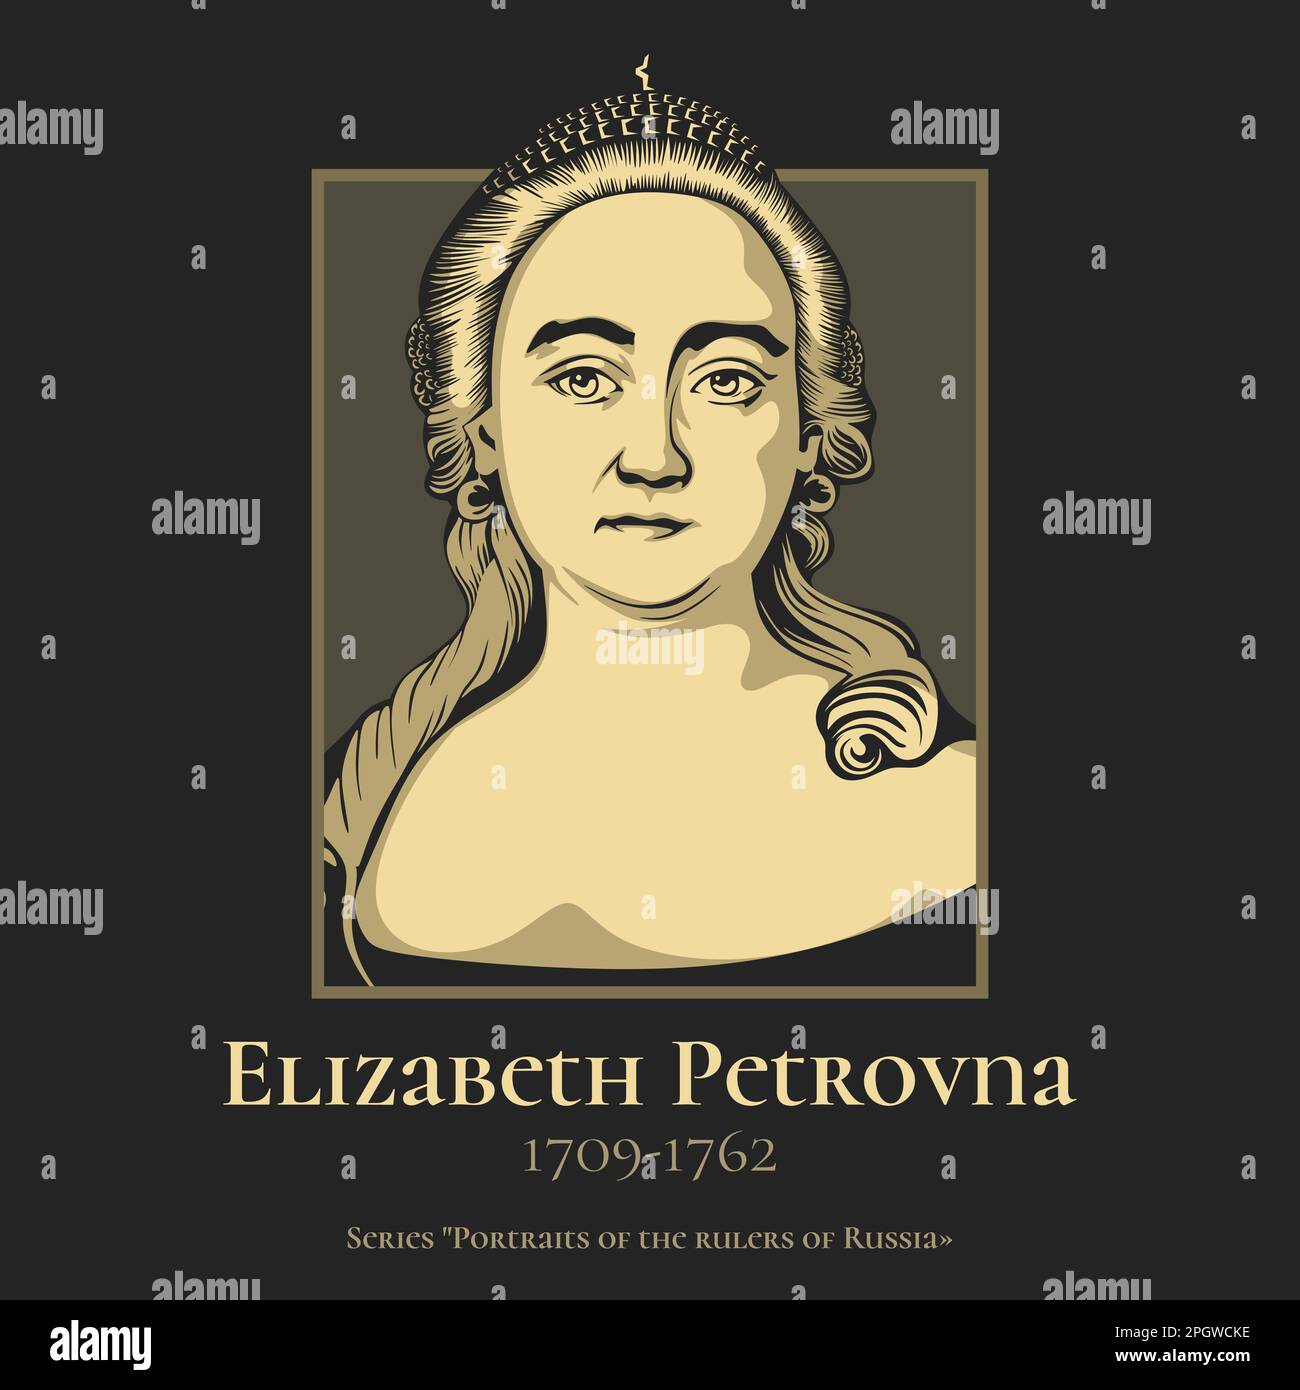 Elizabeth Petrovna (1709-1762) also known as Yelisaveta or Elizaveta, reigned as Empress of Russia from 1741 until her death in 1762. Stock Vector